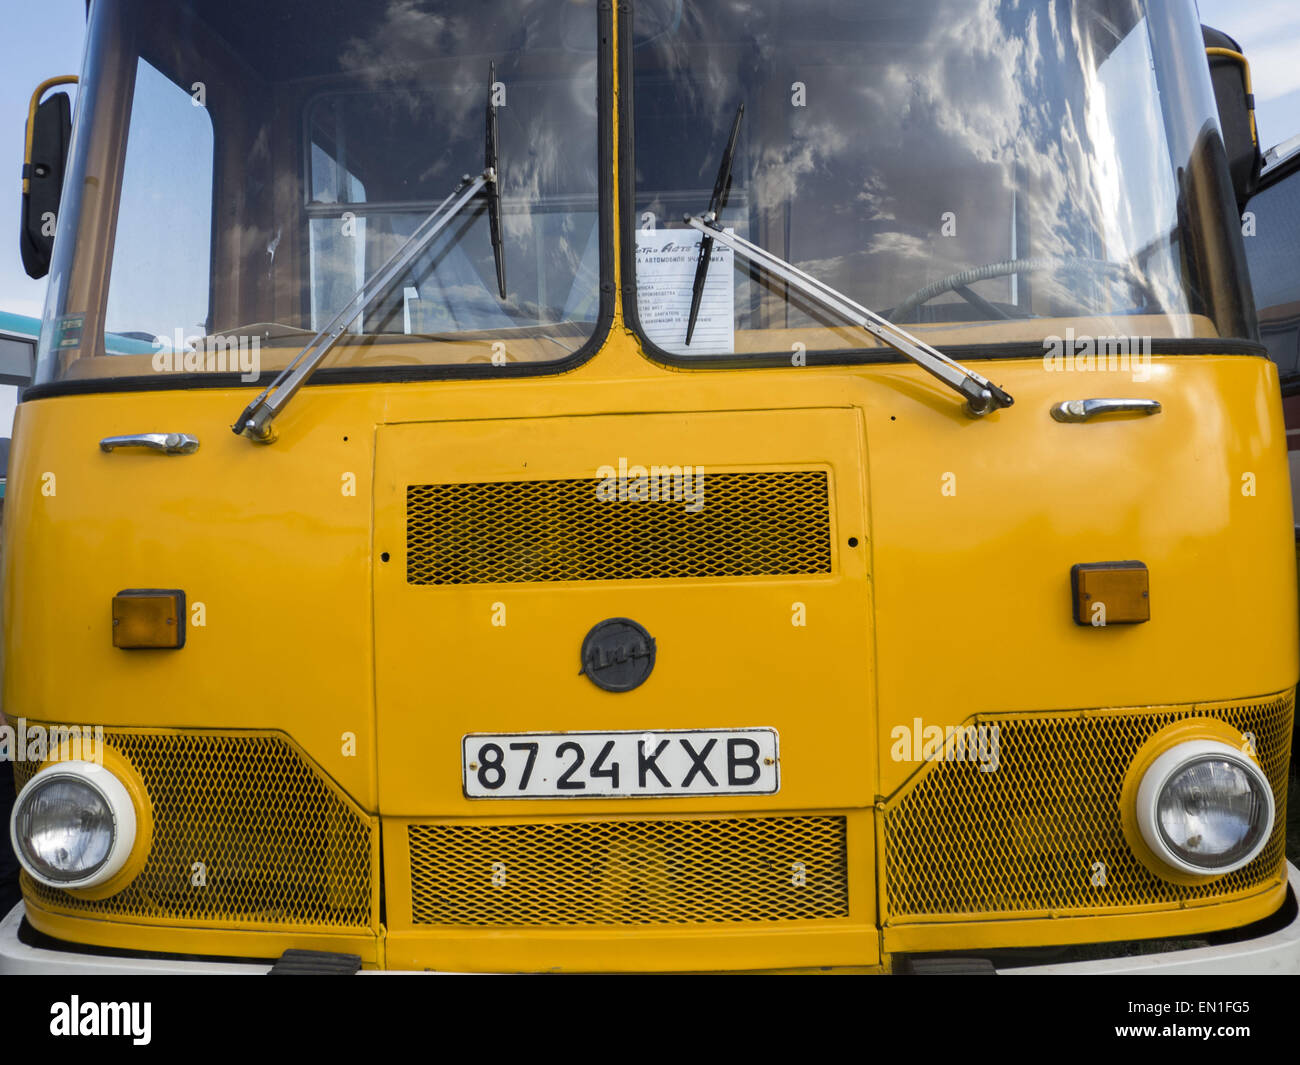 April 25, 2015 - Bus LiAZ-677 -- The Retro OldCarFest is the biggest retro cars festival held in Kiev, and covers the State Aviation Museum grounds. More than 300 cars are involved into this project and more than 20 thousand visitors are expected to attend. © Igor Golovniov/ZUMA Wire/Alamy Live News Stock Photo